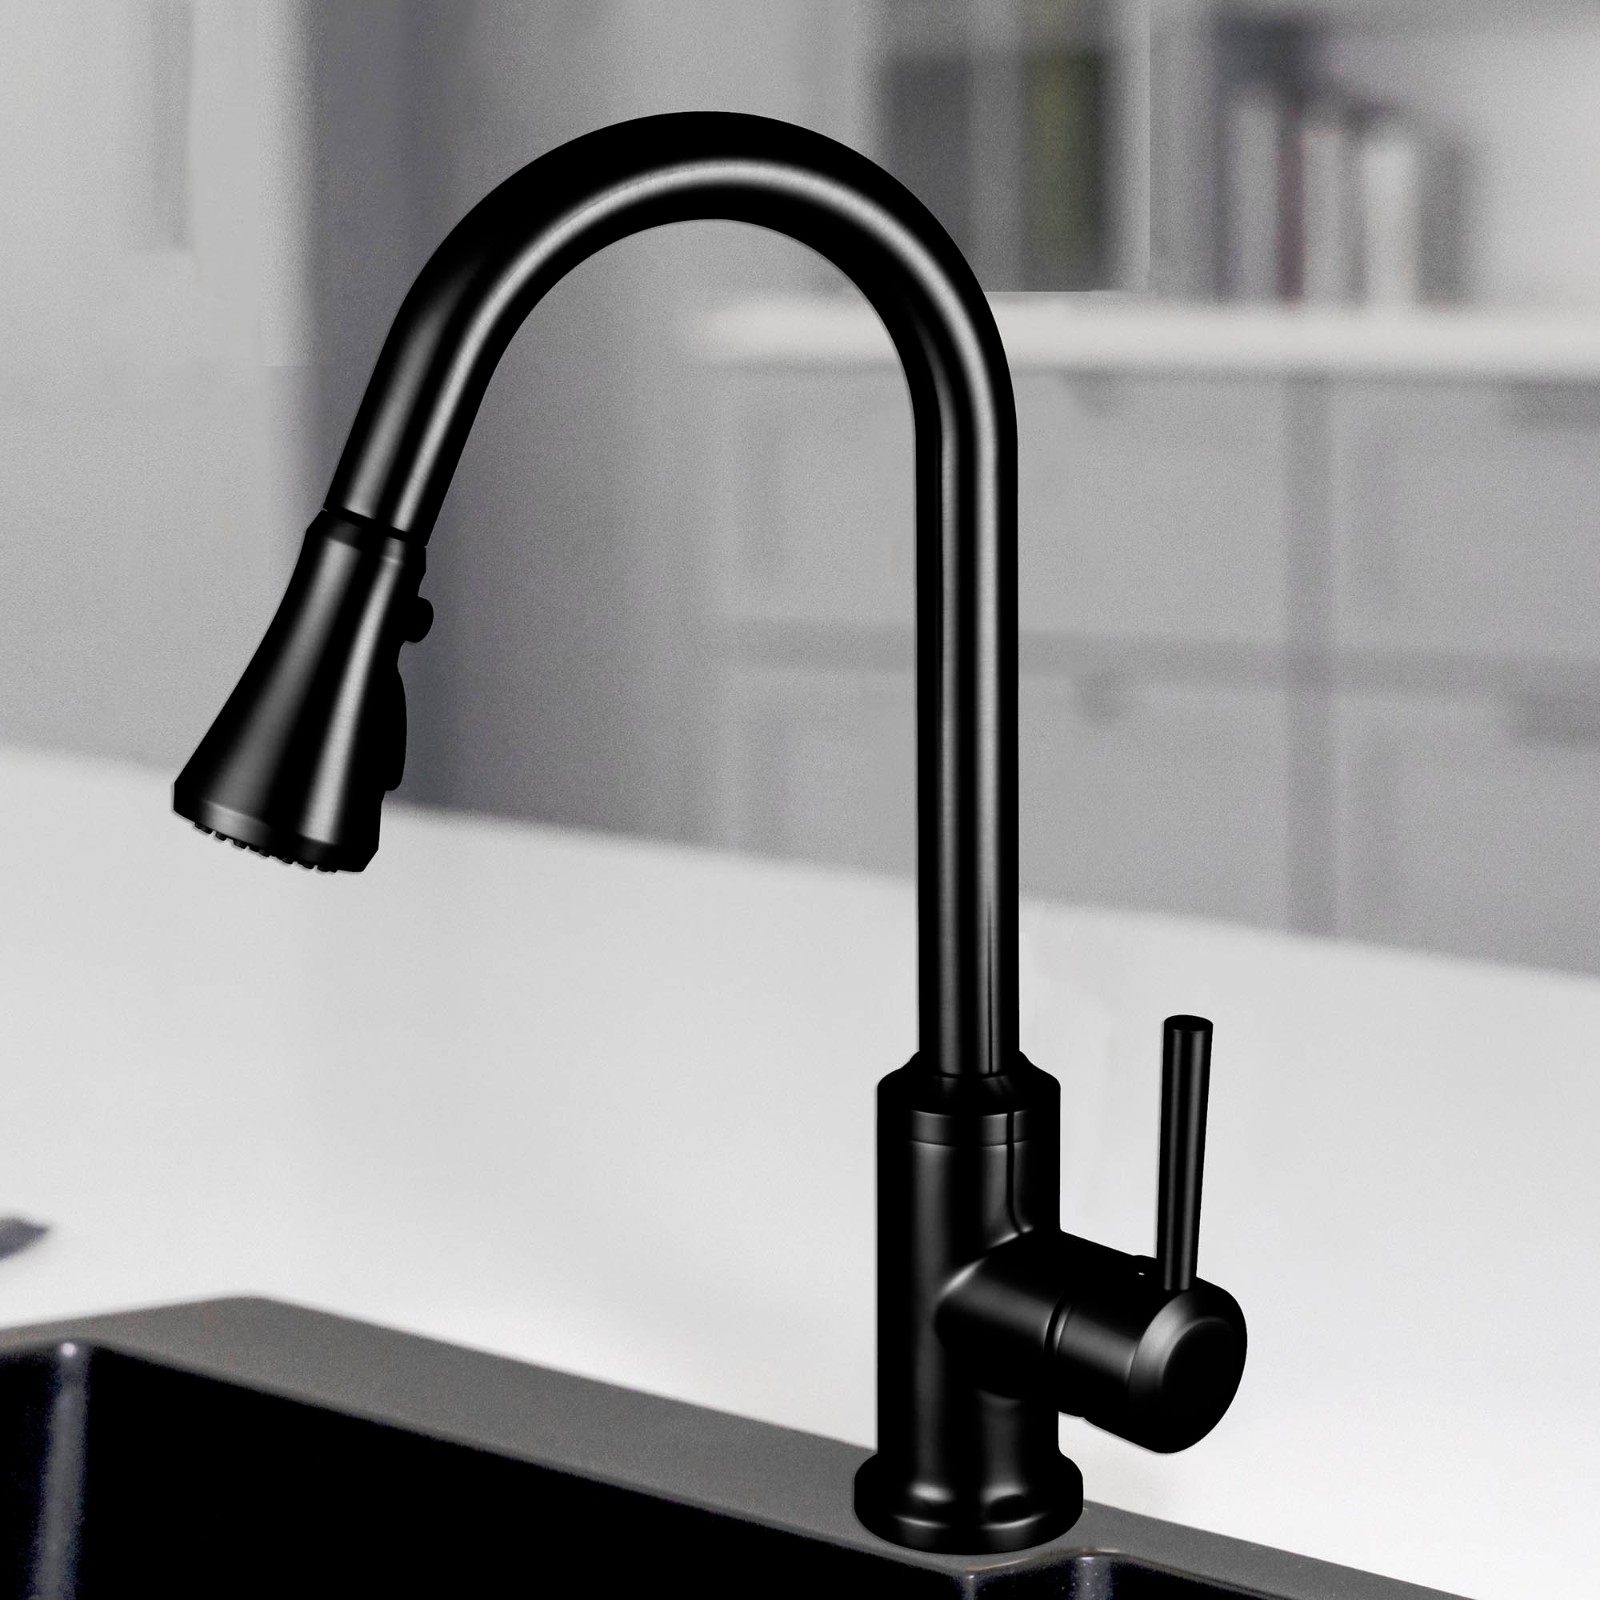  WOODBRIDGE WK101201BL Stainless Steel Single Handle Pull Down Kitchen Faucet in Matte Black Finish._9016